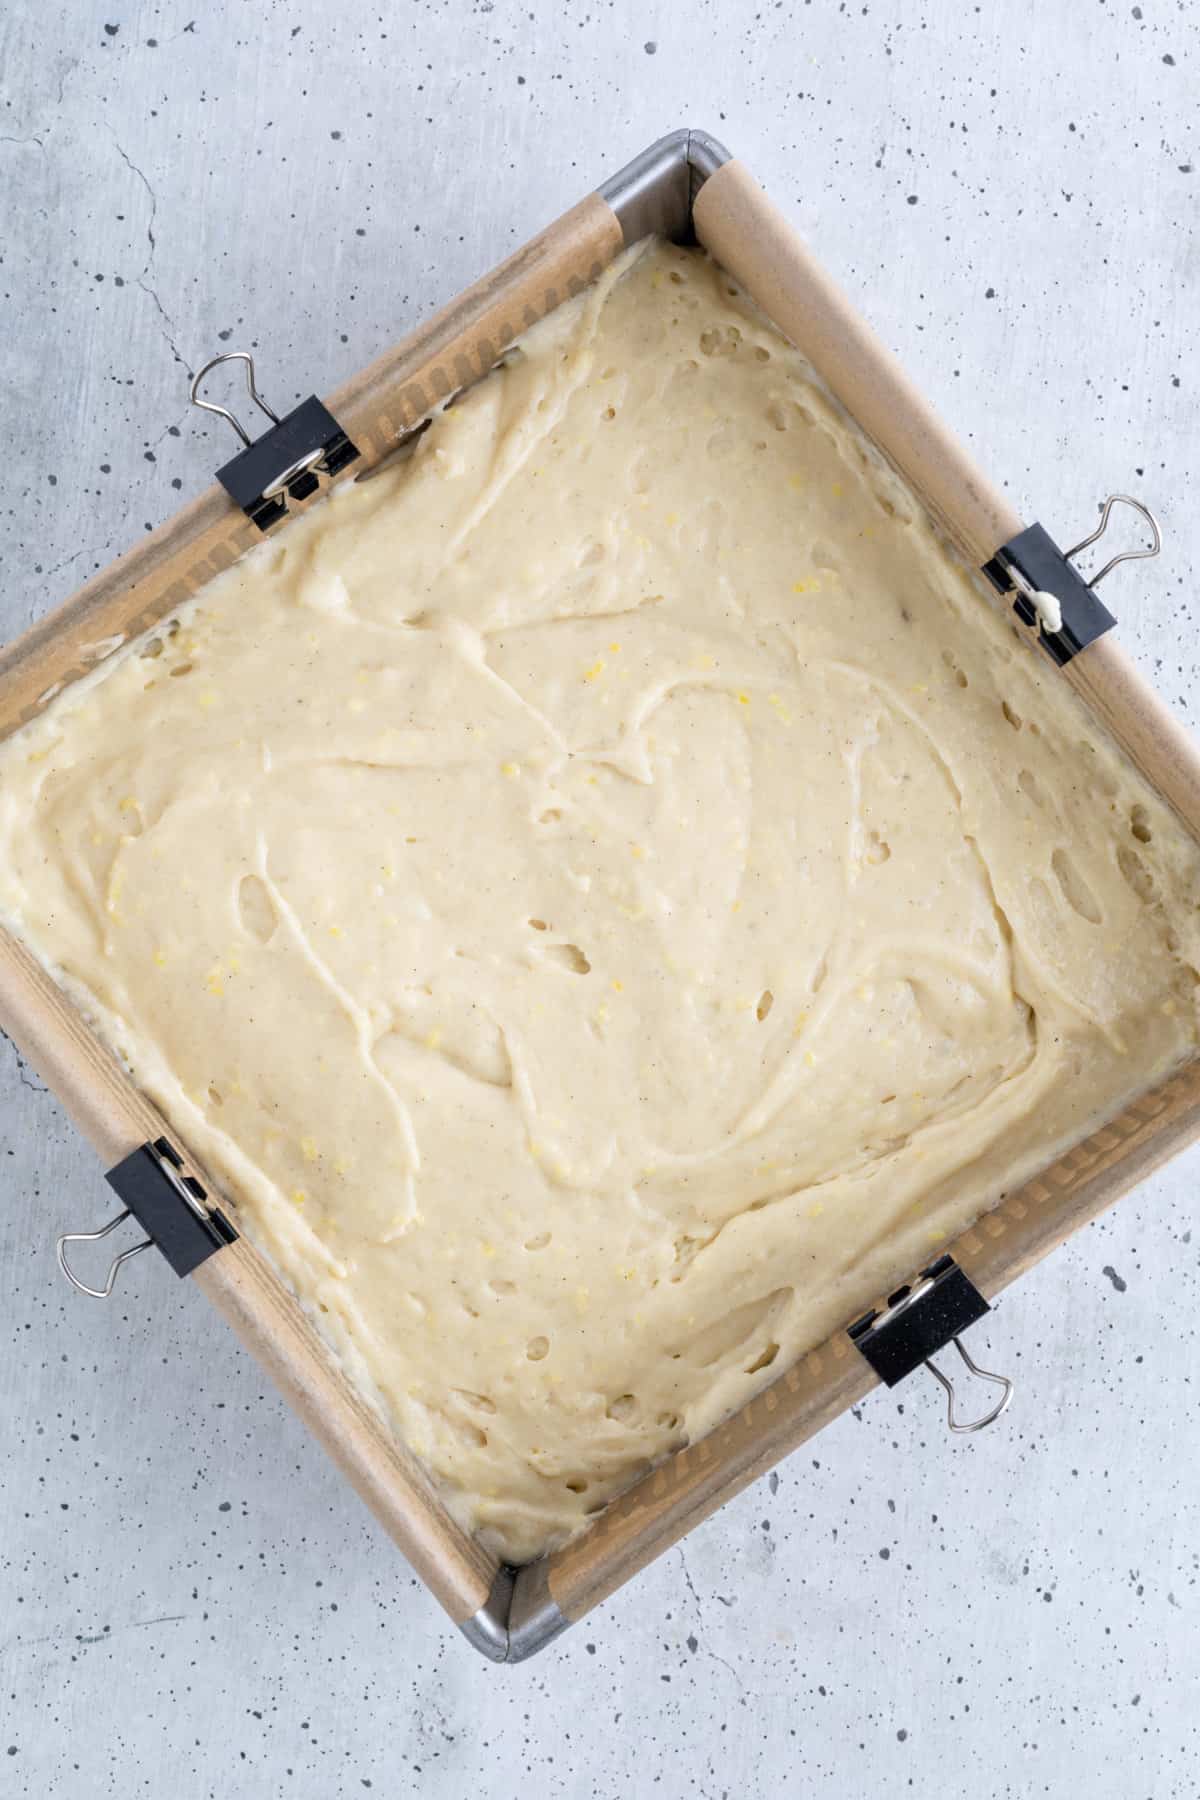 Cake batter spread into a parchment-lined cake pan.